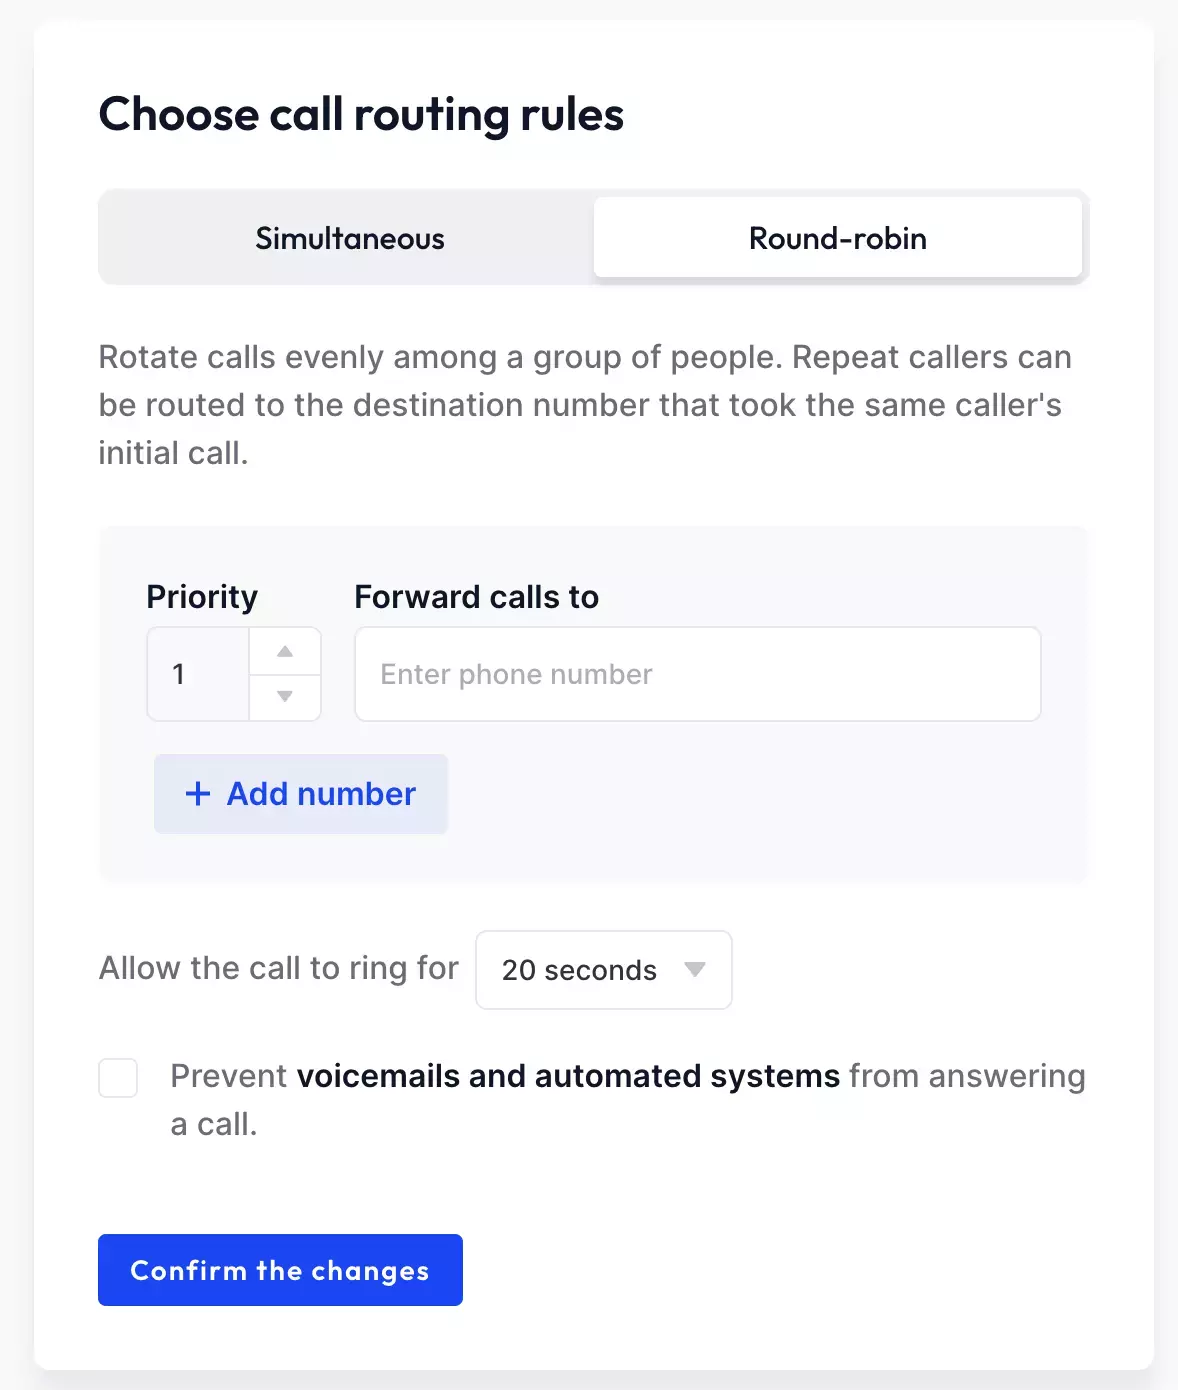 An image of Community Phone's business landline round-robin call routing feature